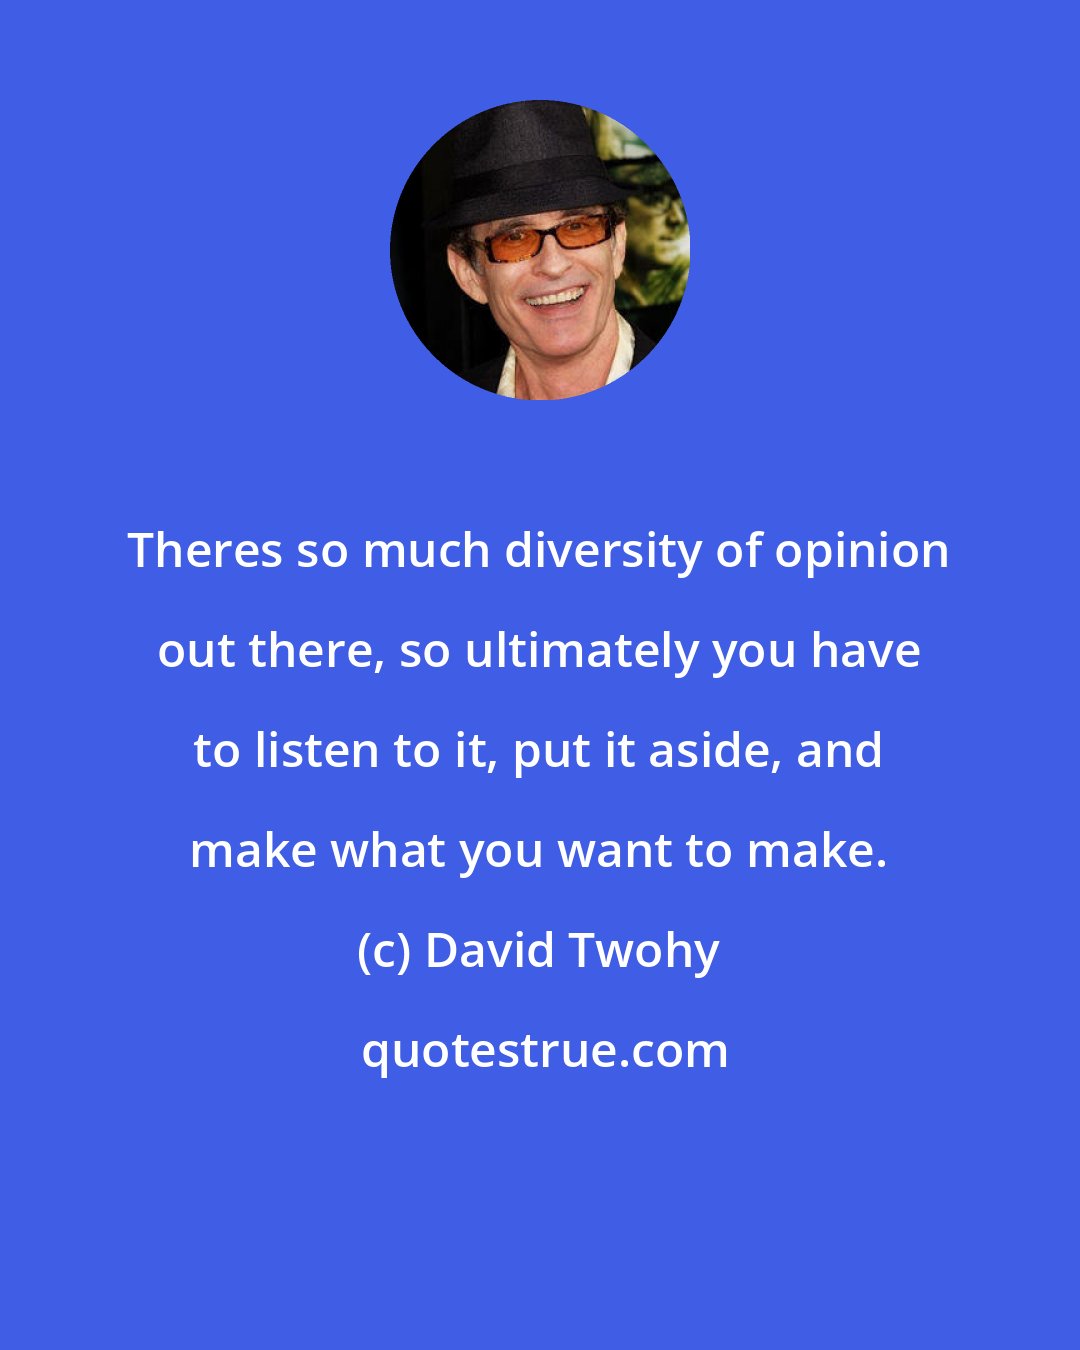 David Twohy: Theres so much diversity of opinion out there, so ultimately you have to listen to it, put it aside, and make what you want to make.